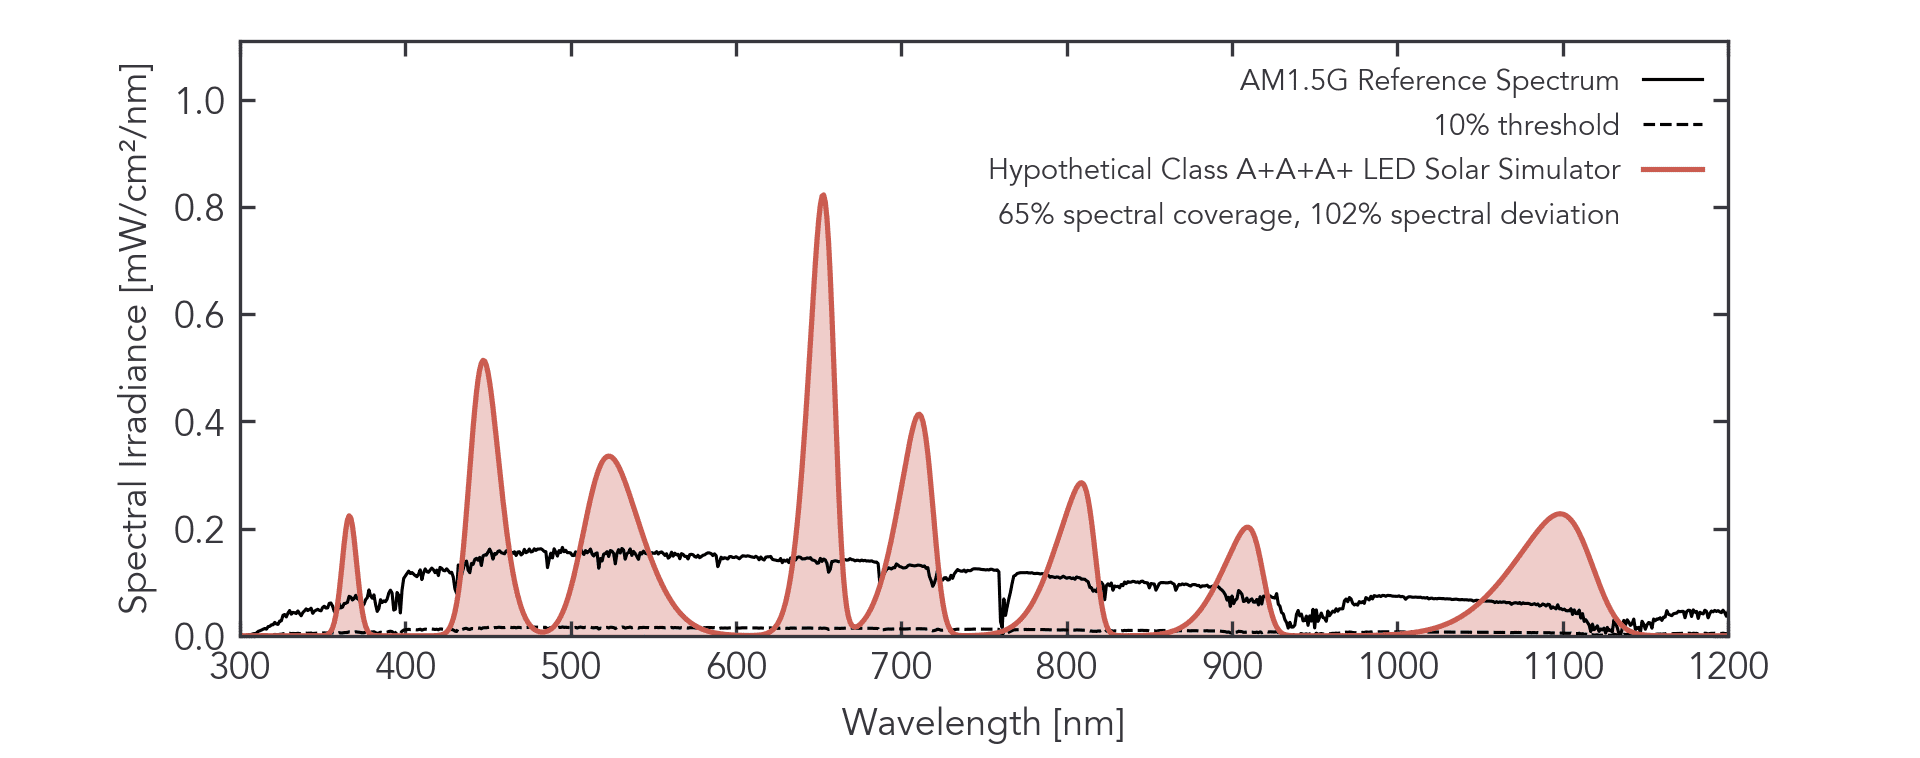 A hypothetical Class A+ solar spectrum consisting of LED emissions that look like fingers on a hand.